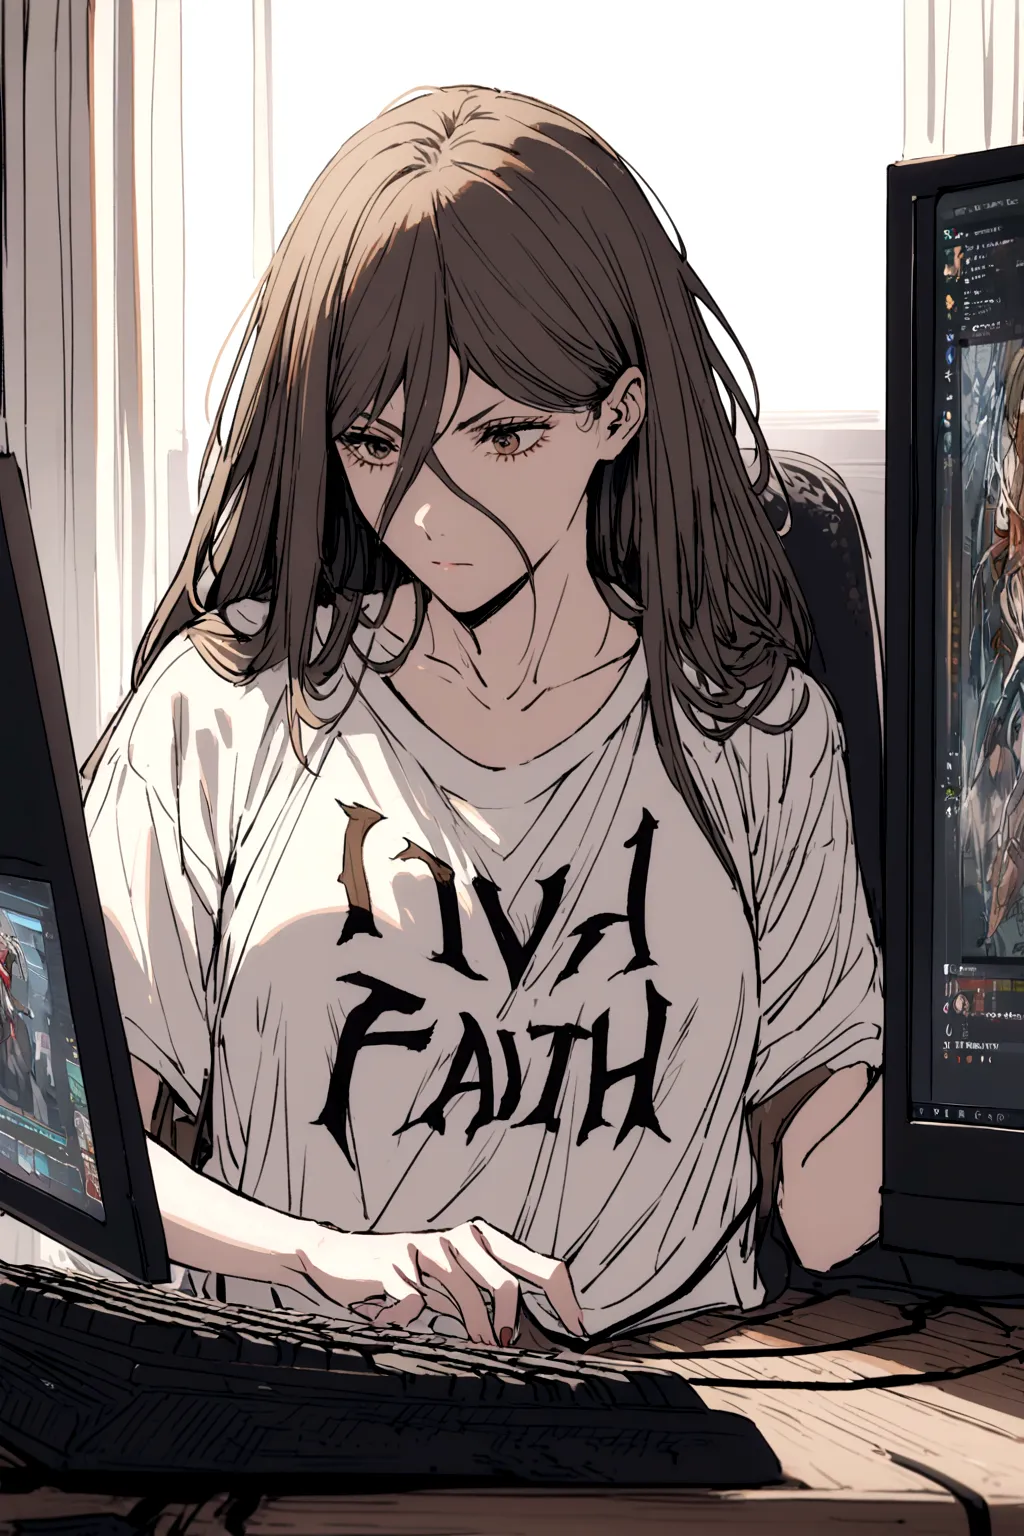 A Power,playing on a PC,all faith.,wearing a shirt written, Harl.